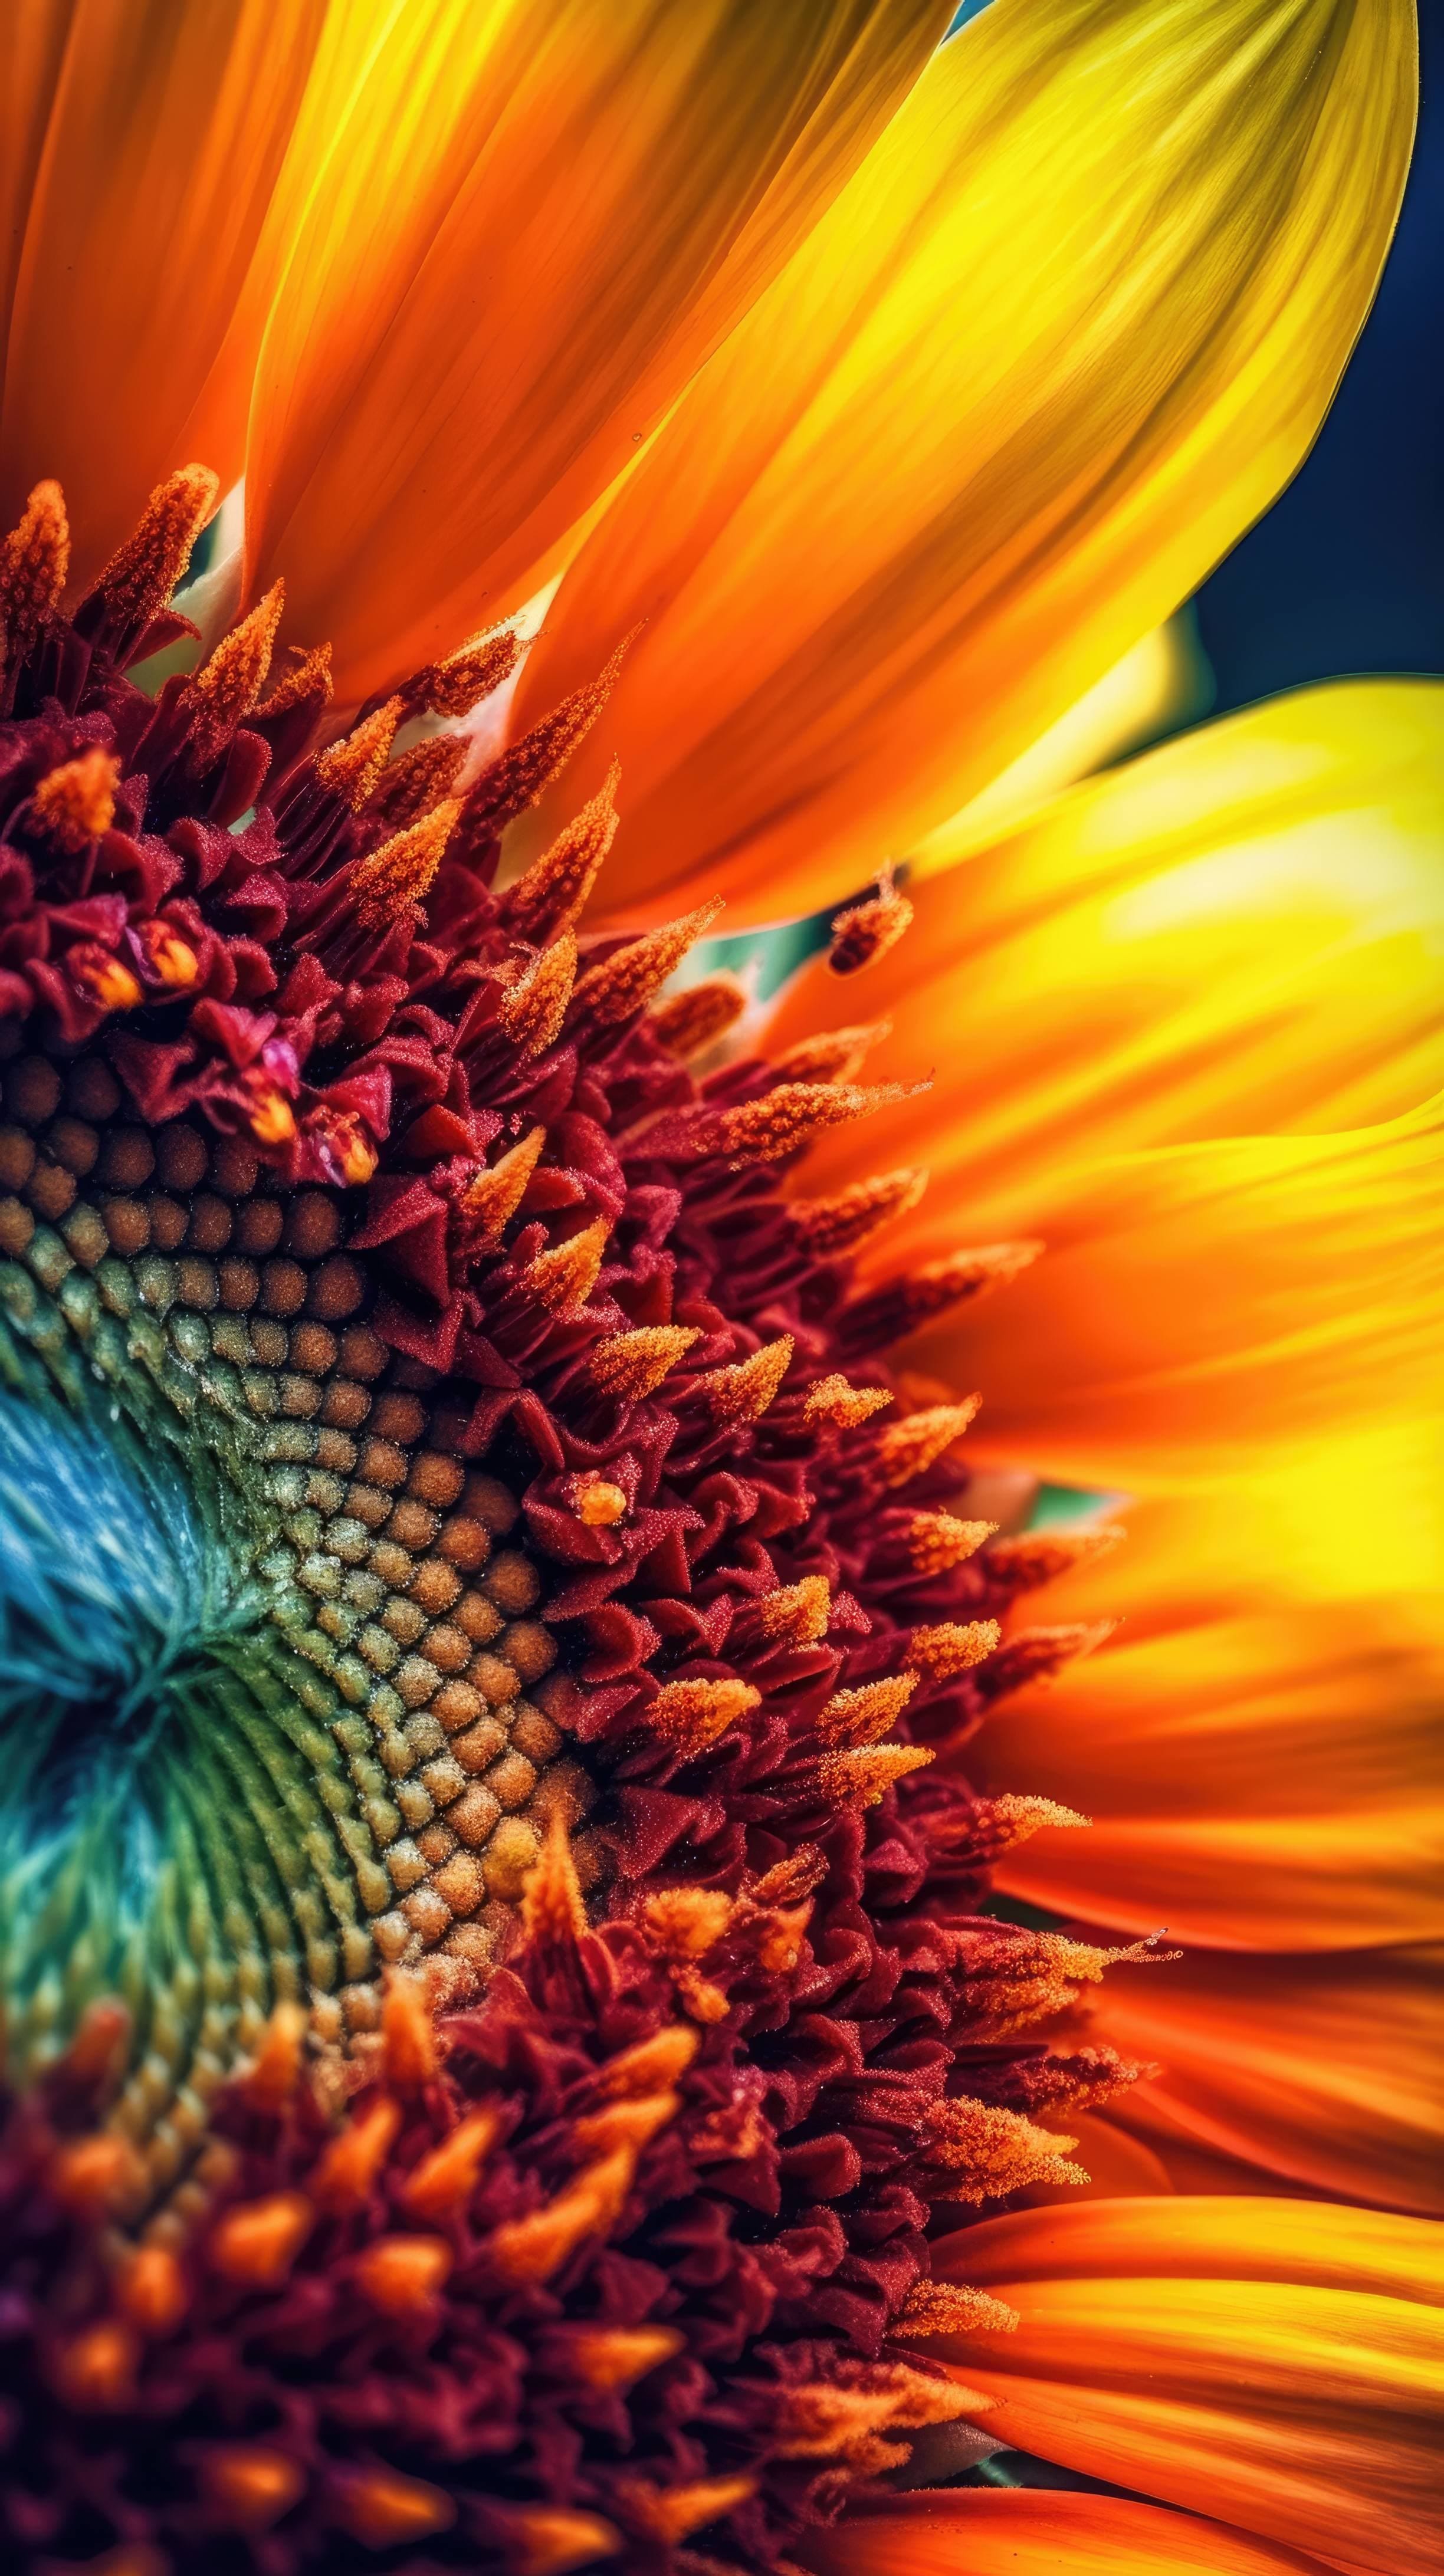 A colorful sunflower